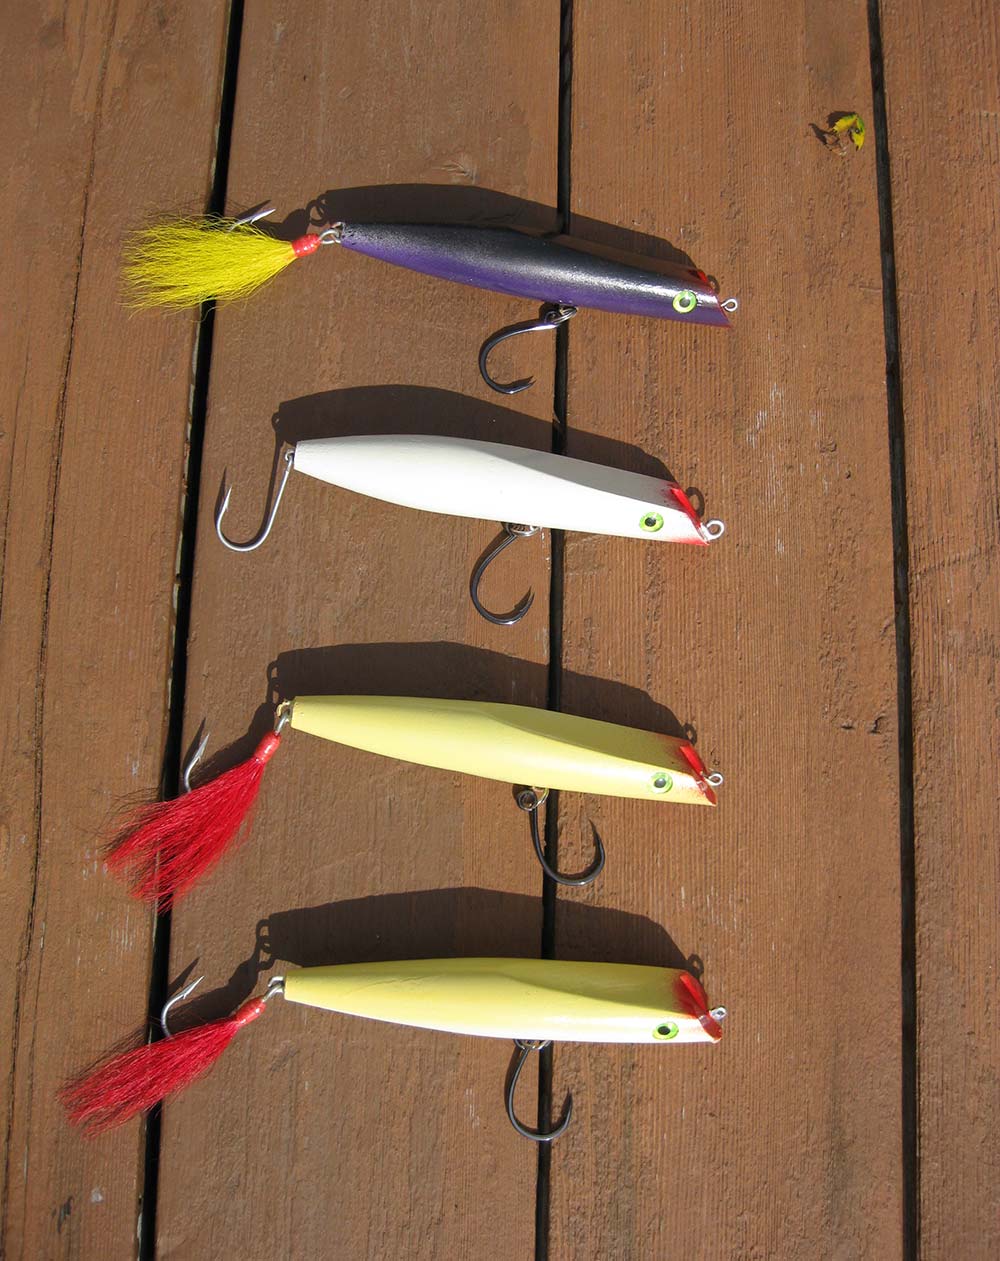 A selection of the author’s homemade darters rigged with in-line hooks and ready to fish.